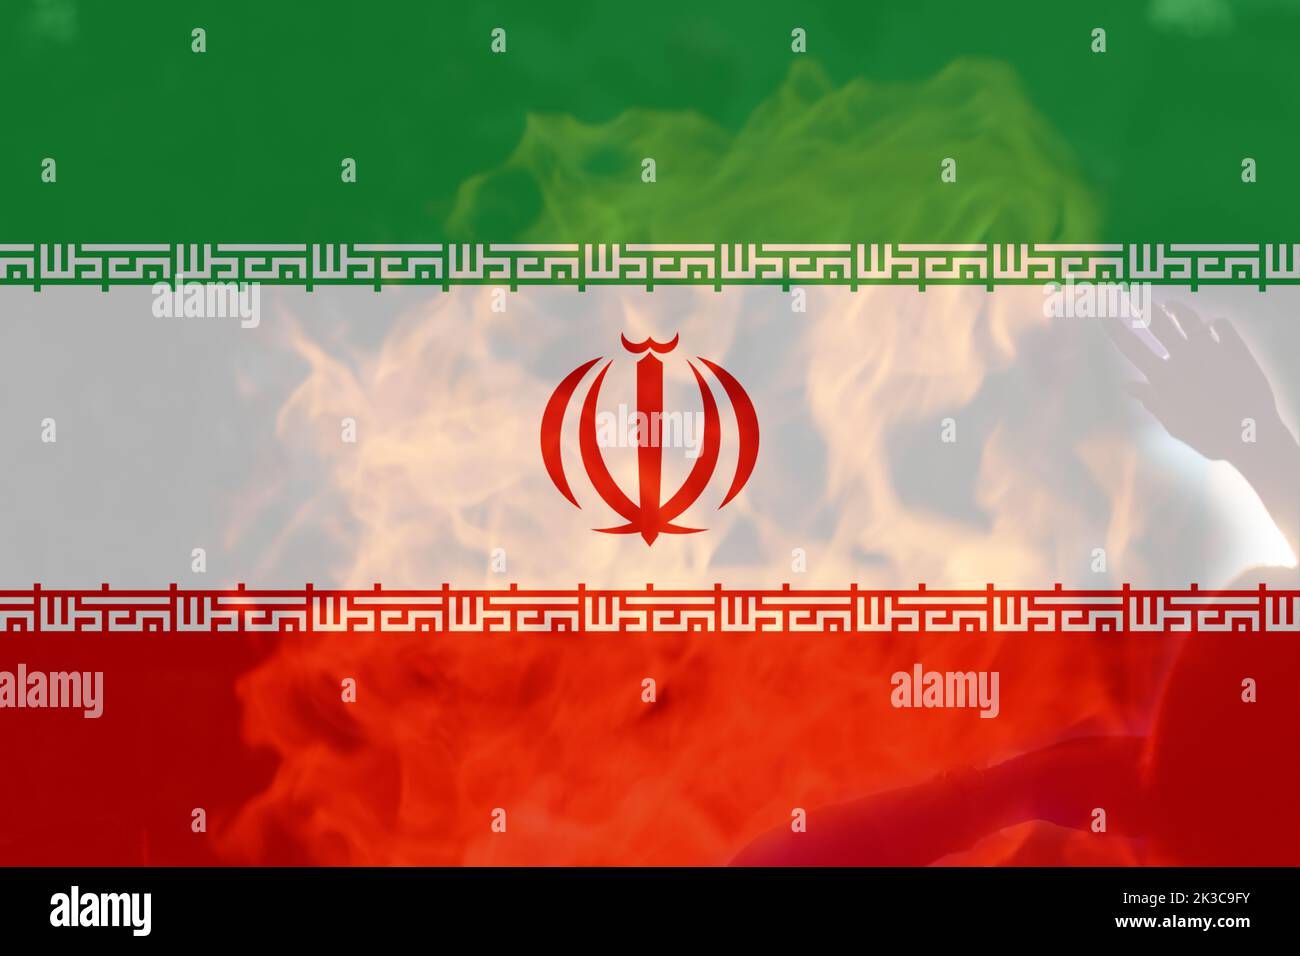 Defocus protest in Iran. Conflict war over border. Country flag. Woman low rights. Male hands. Iranian women. Violence Iran. Fire, flame. Out of focus Stock Photo